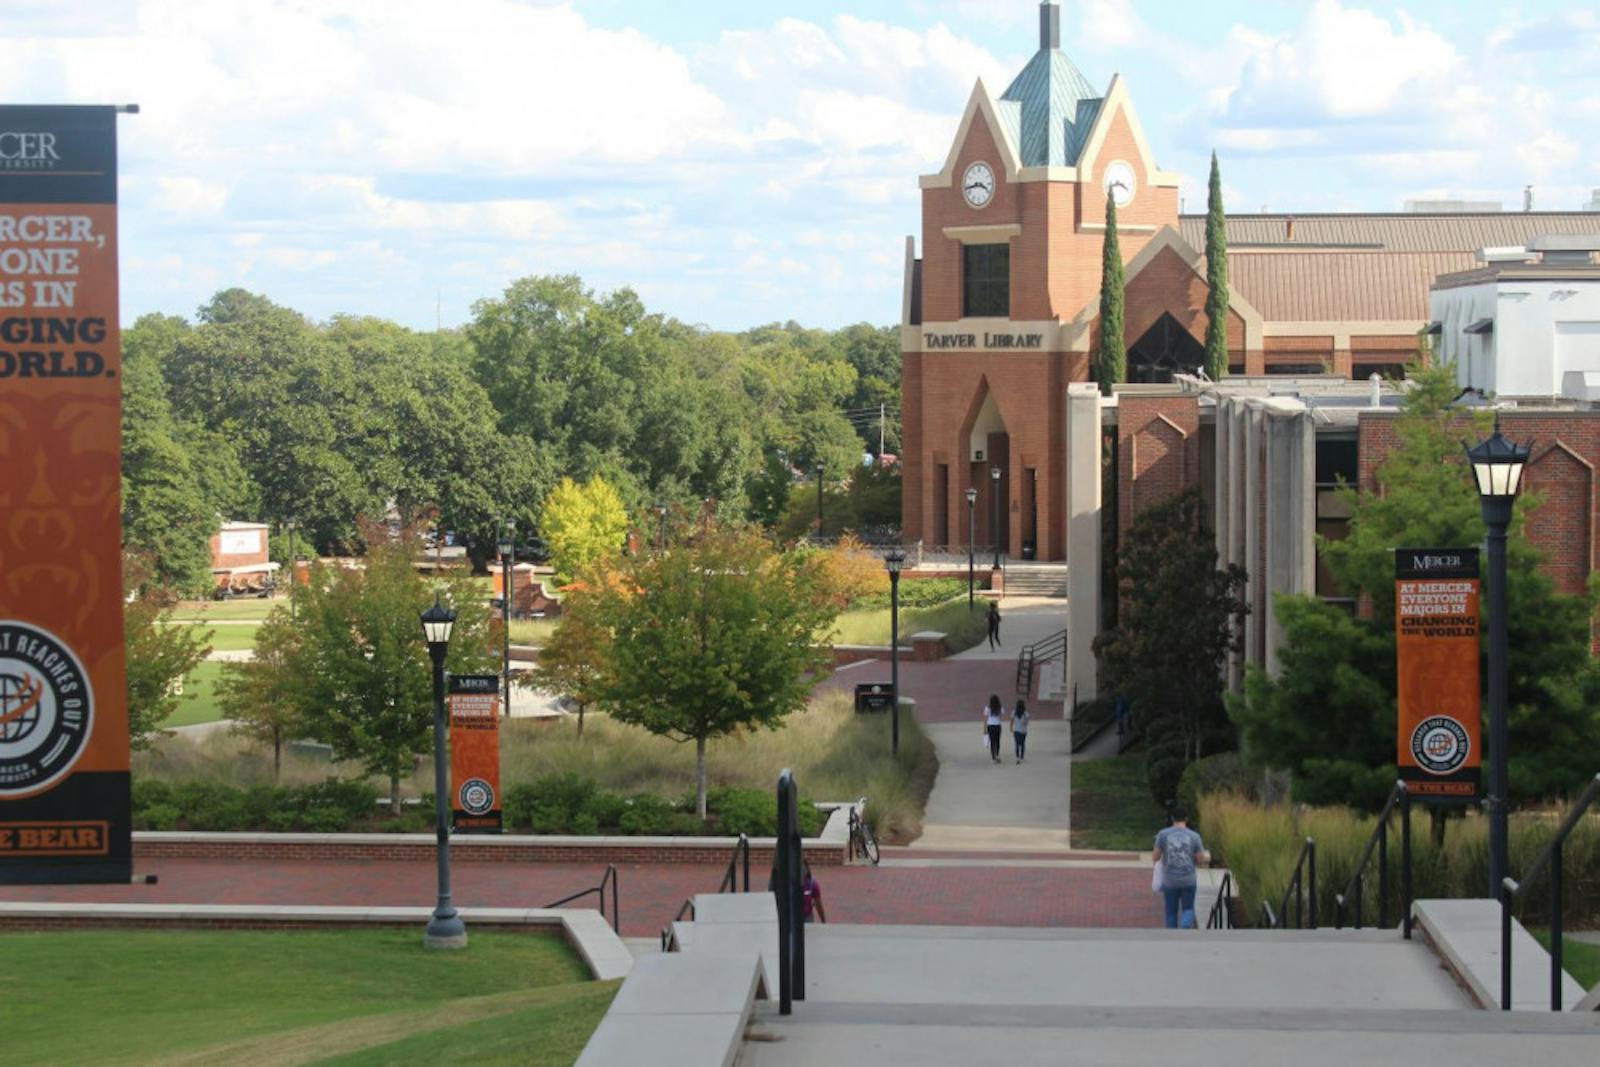 Mercer University Announces Changes To Fall Semester To Combat Covid-19 - The Mercer Cluster